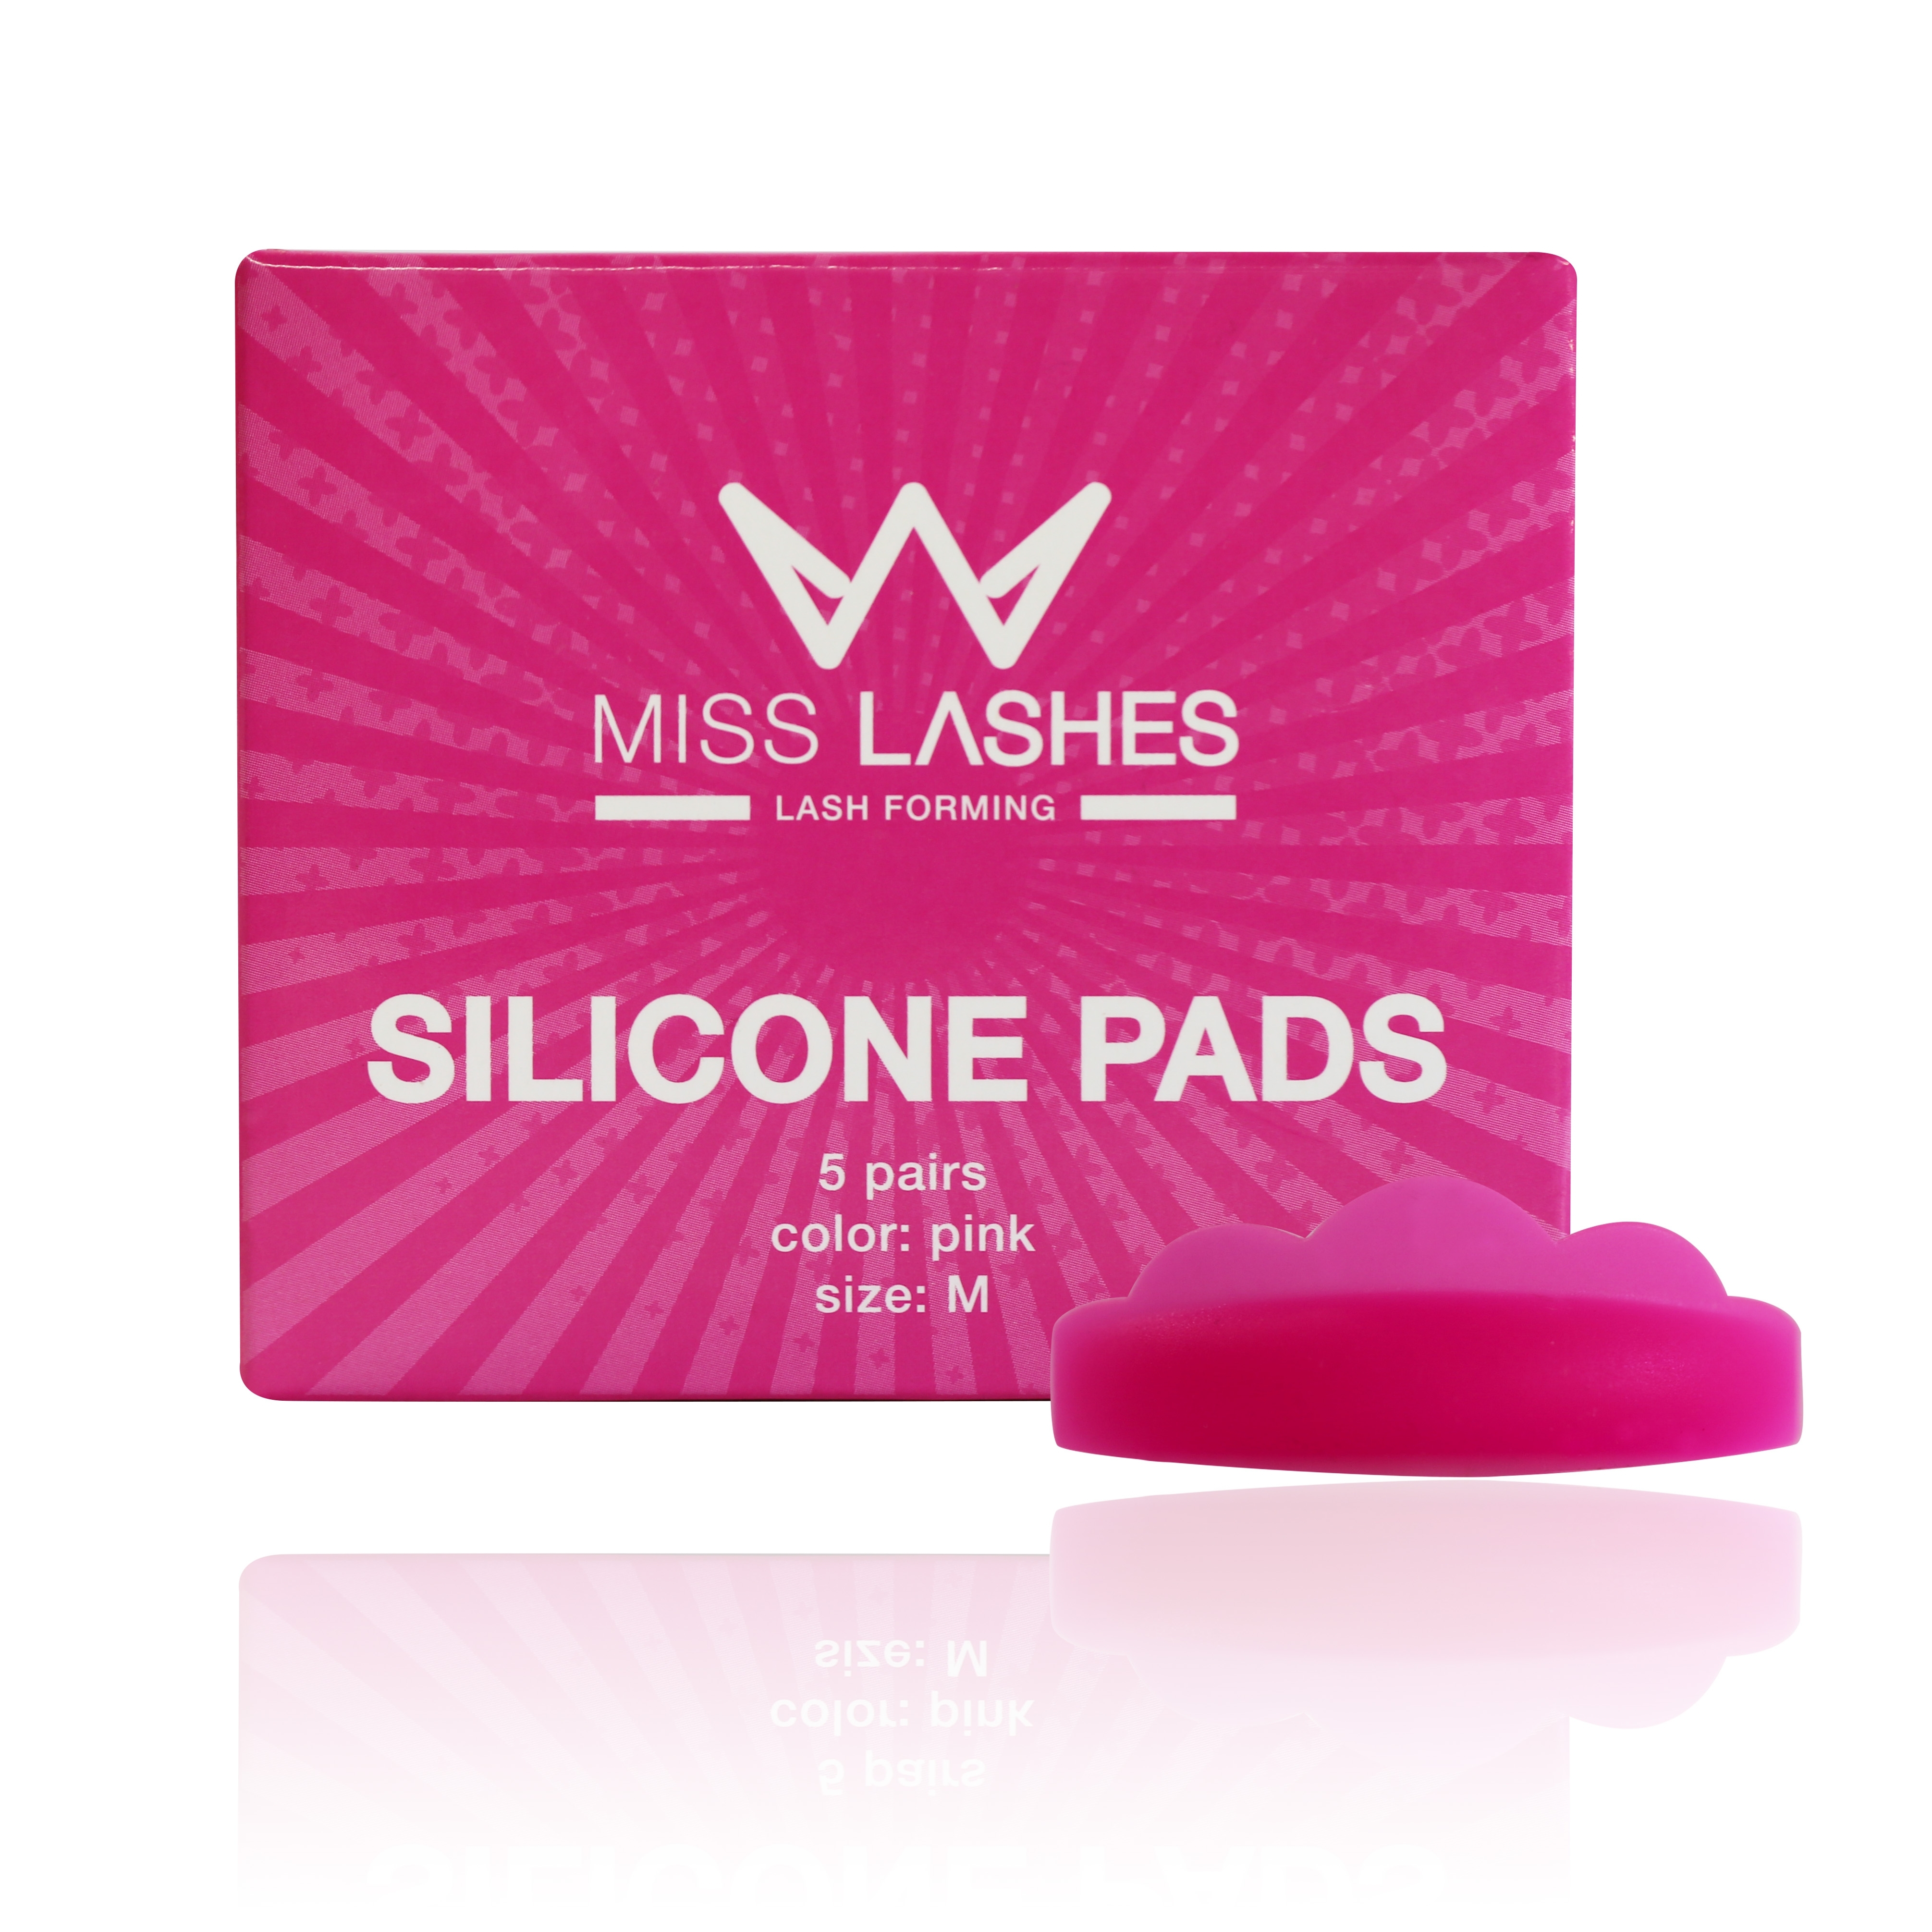 MISS LASHES Silikon Pads Pink M 5 Paare